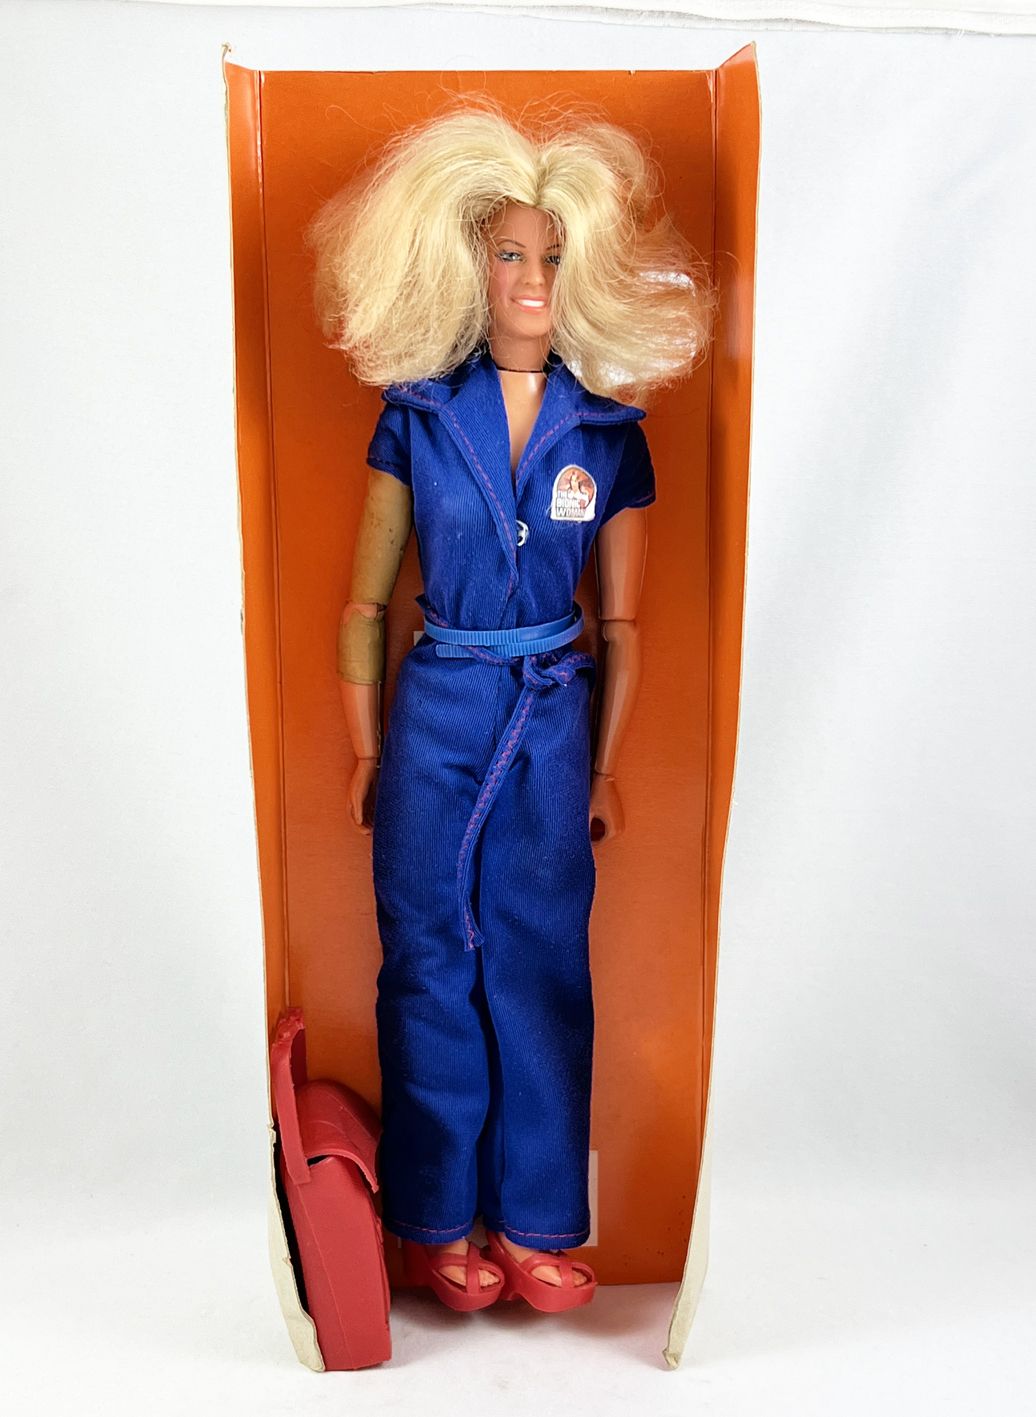 Kenner Bionic Woman Jaime Sommers Action Figure Doll White Jacket